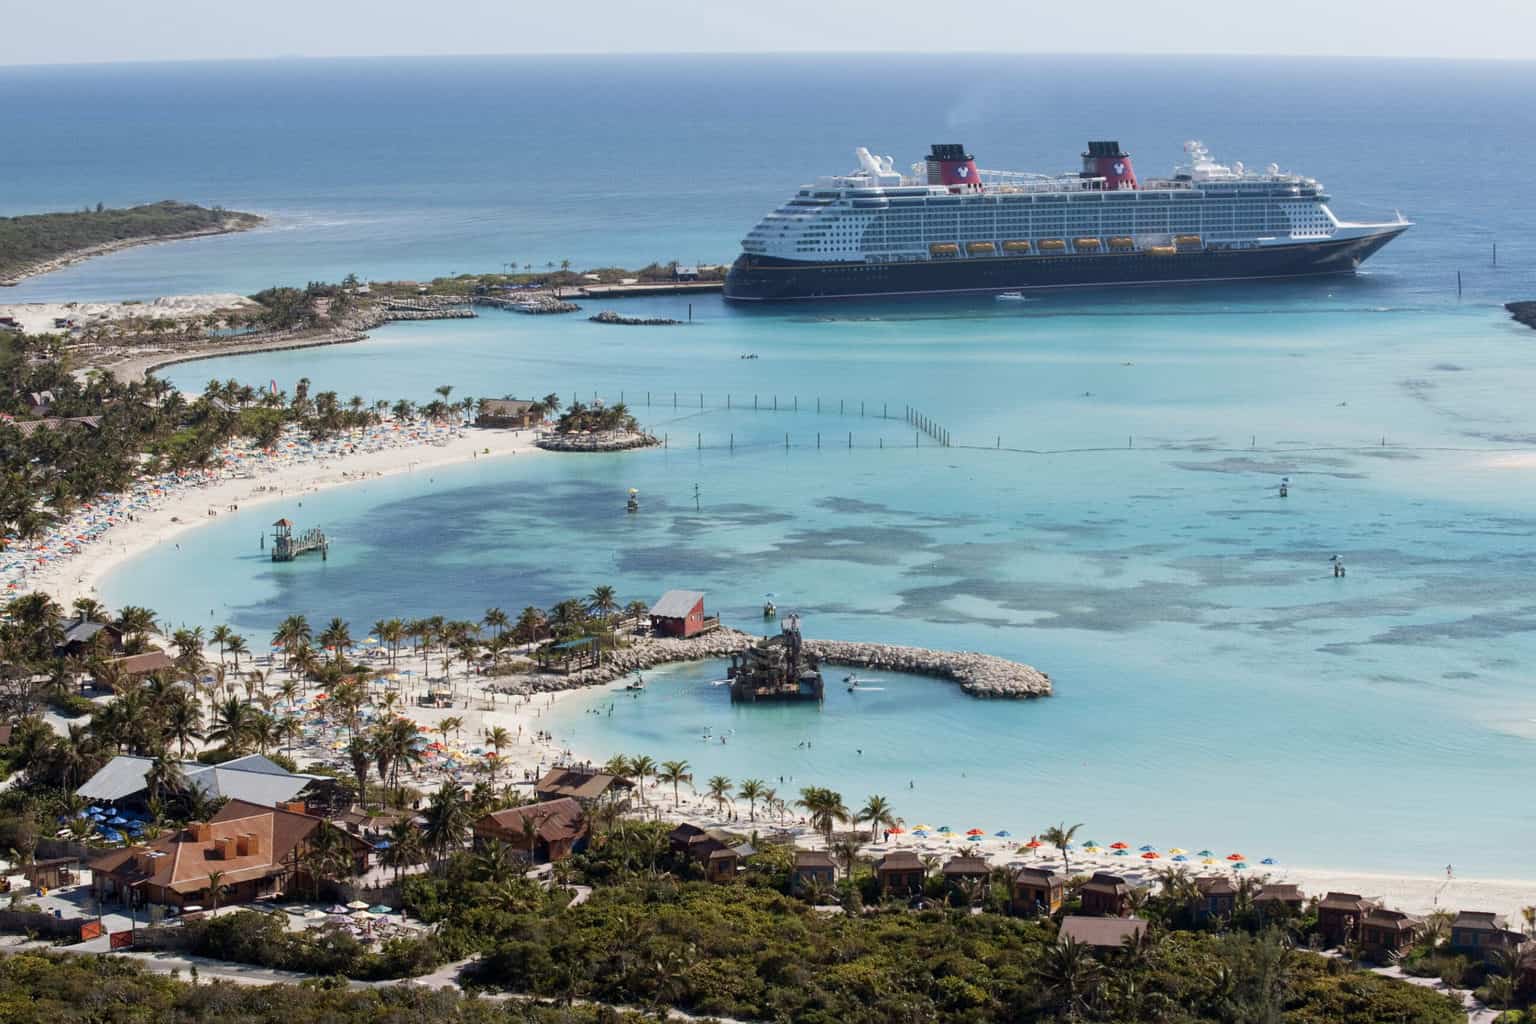 he Disney Dream docks at Castaway Cay, Disney's private island in the tropical waters of the Bahamas, reserved exclusively for Disney Cruise Line guests. In a setting of crystal-clear turquoise waters, powdery white-sand beaches and lush landscapes, the 1,000-acre island offers one-of-a-kind areas and activities for every member of the family. (David Roark, photographer)